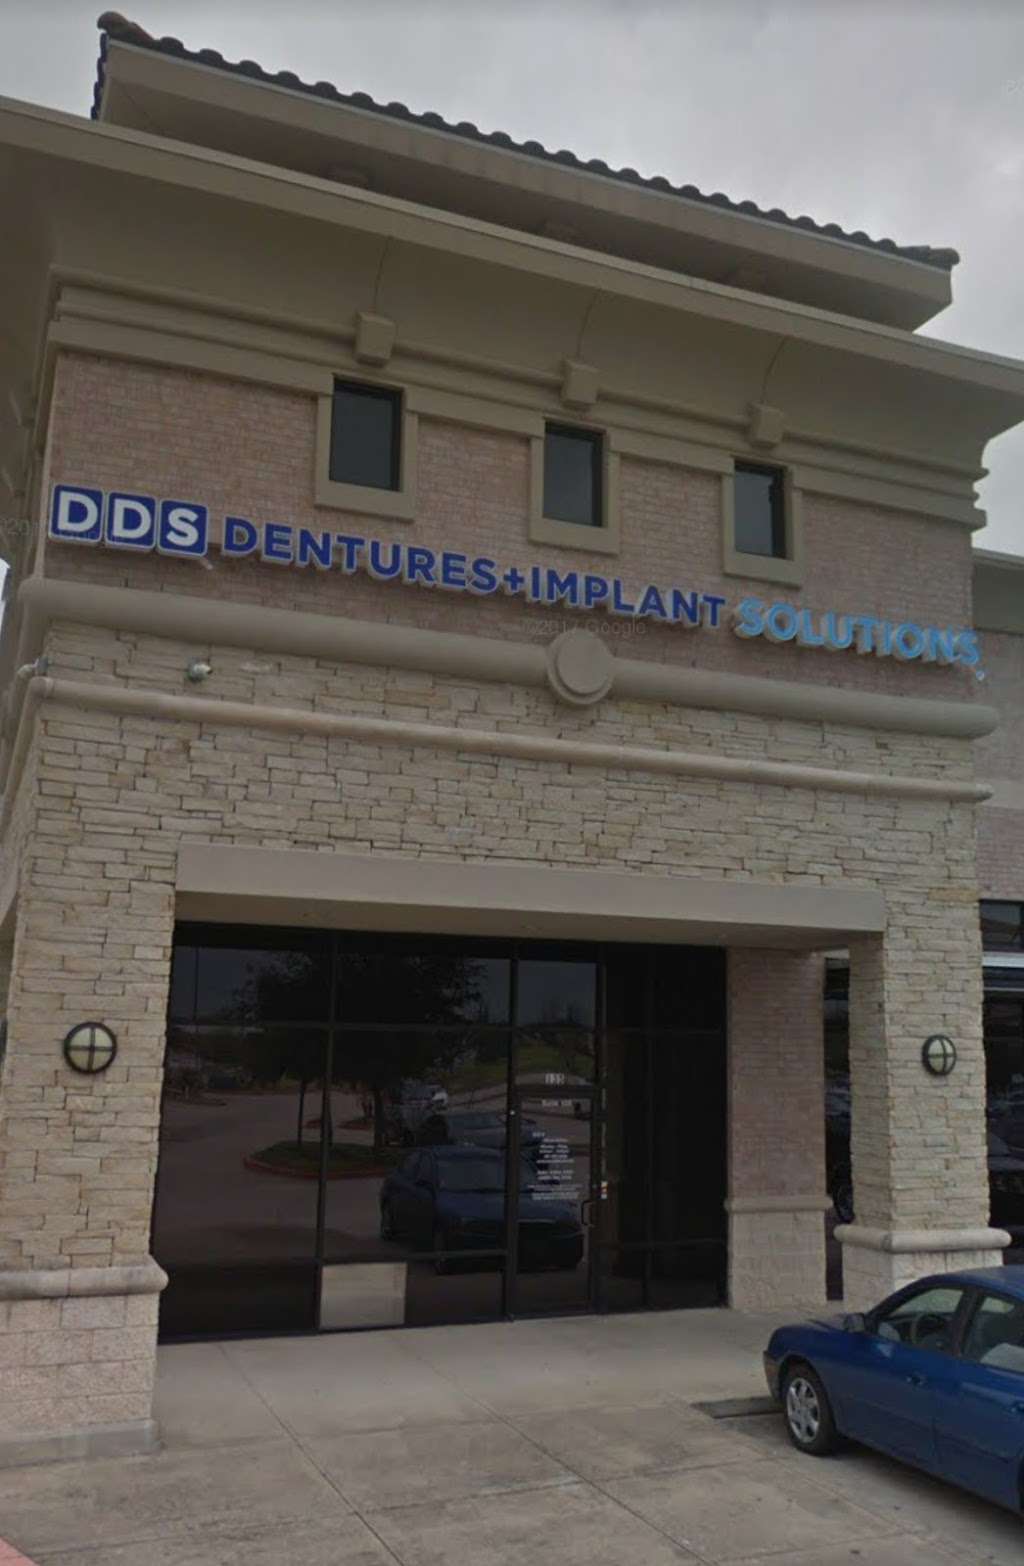 DDS Dentures + Implant Solutions of Pearland | 11901 Shadow Creek Pkwy Suite 135, Pearland, TX 77584 | Phone: (281) 206-2211